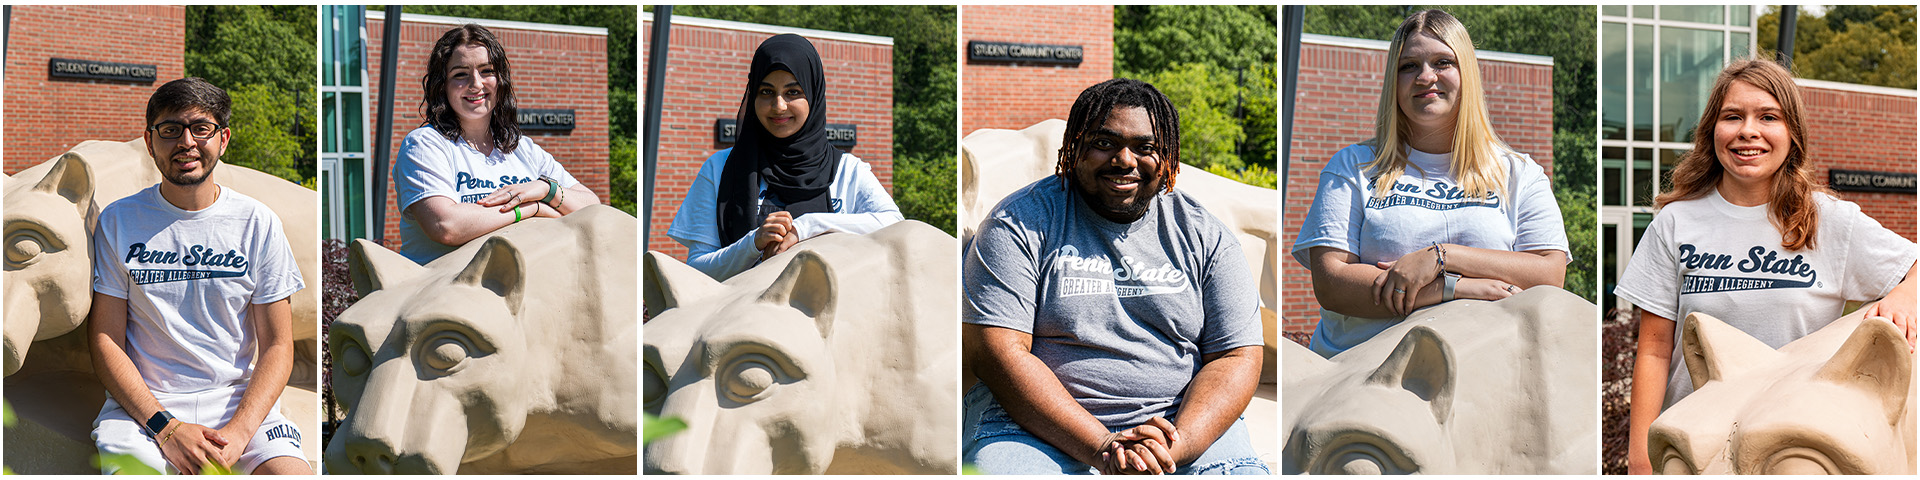 Image of New Student Orientation Leaders wearing Penn State Greater Allegheny T-Shirts posed for photos at the Nittany Lion Shrine statue